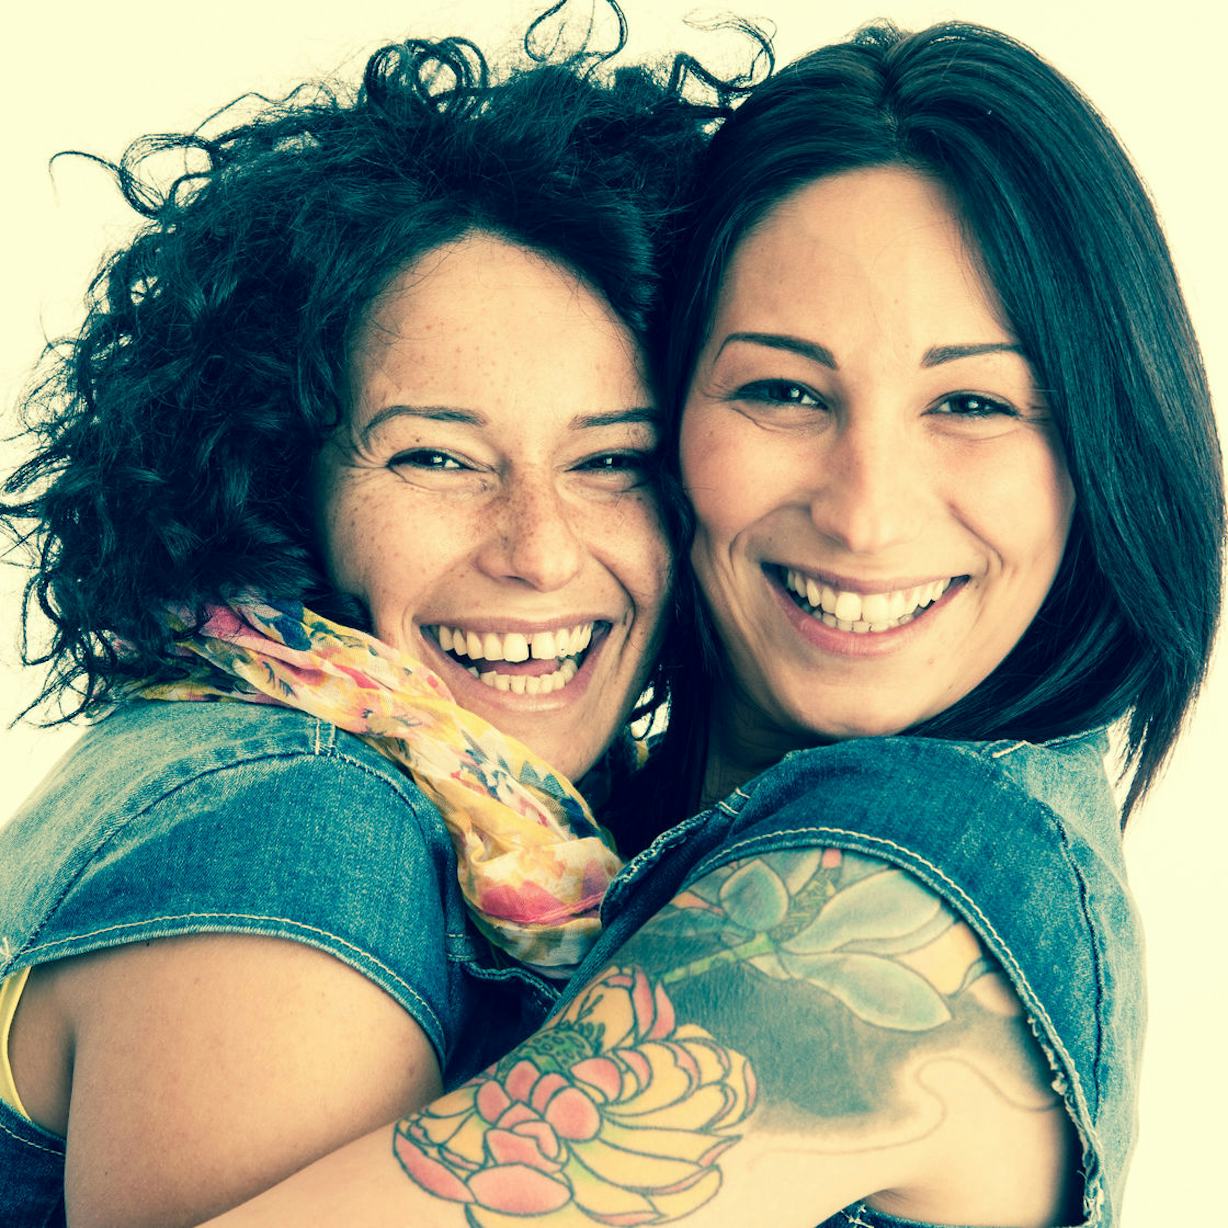 11 Traits To Look For In A Mom Friend Because Shes The Only One Who Understands Your Struggles